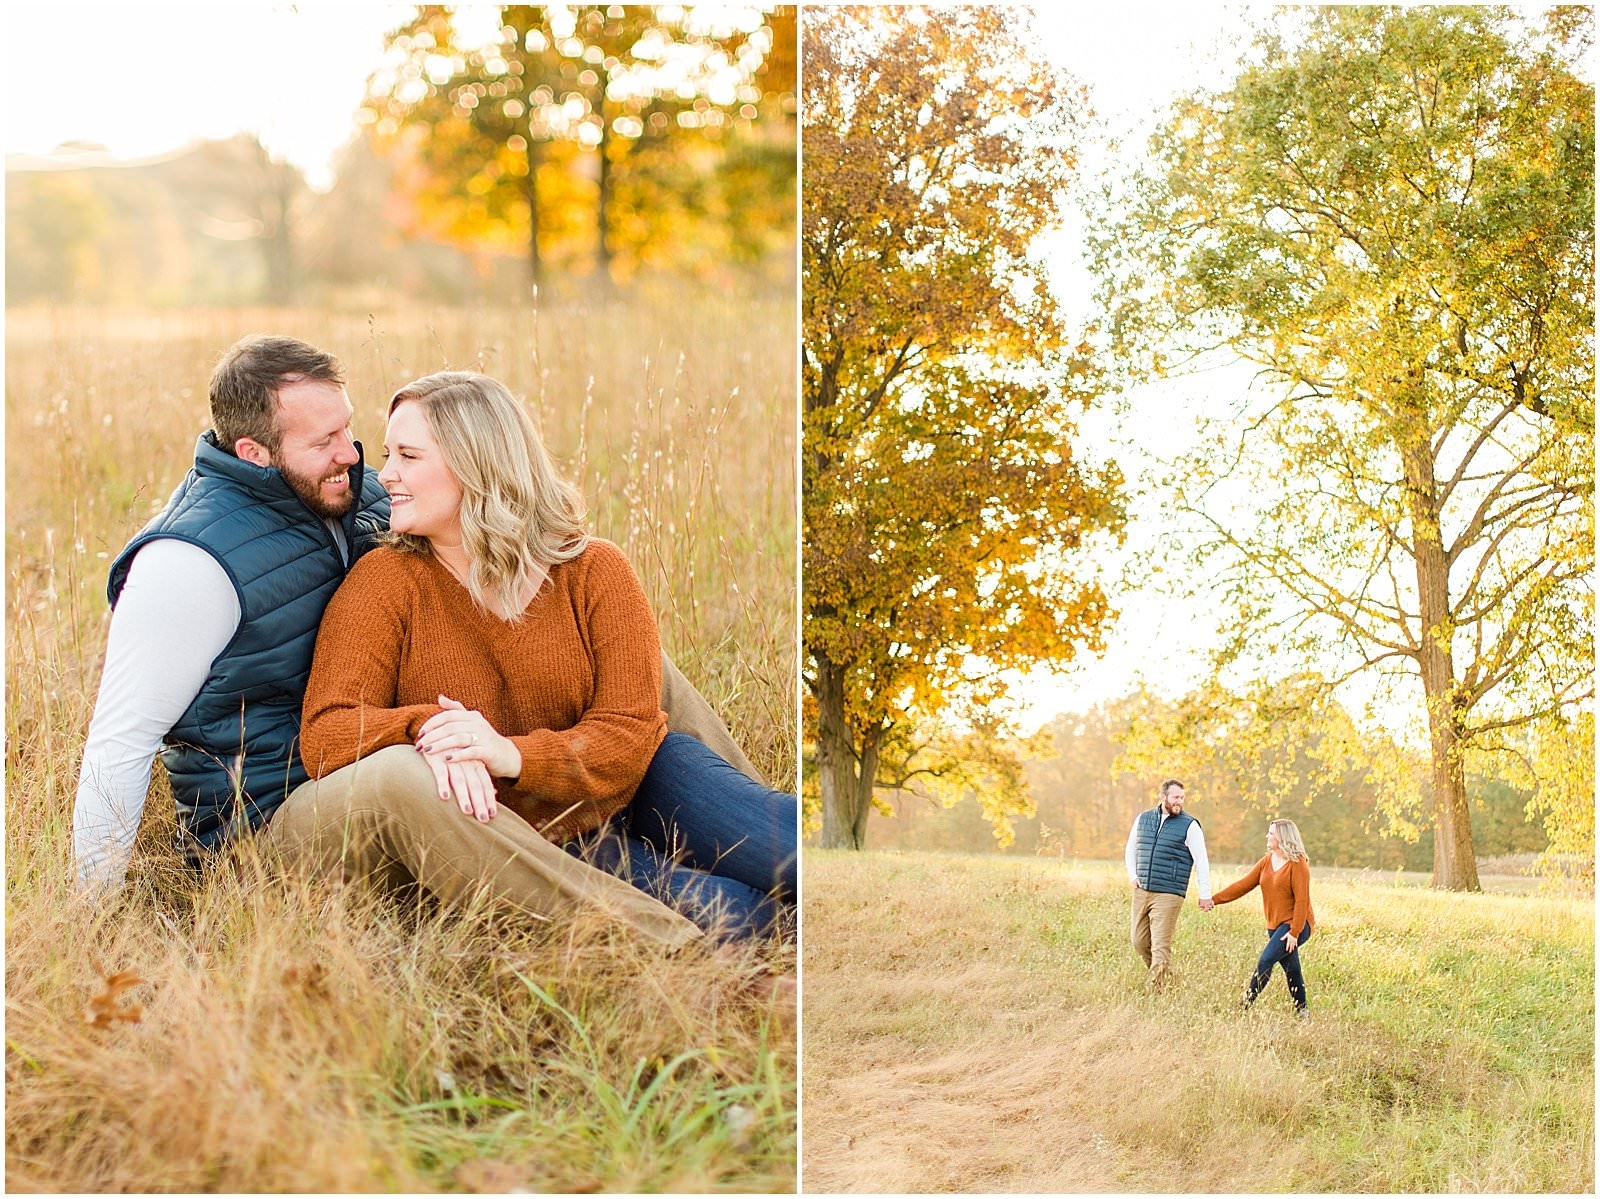 The Best of Engagement Sessions 2020 Recap0039.jpg